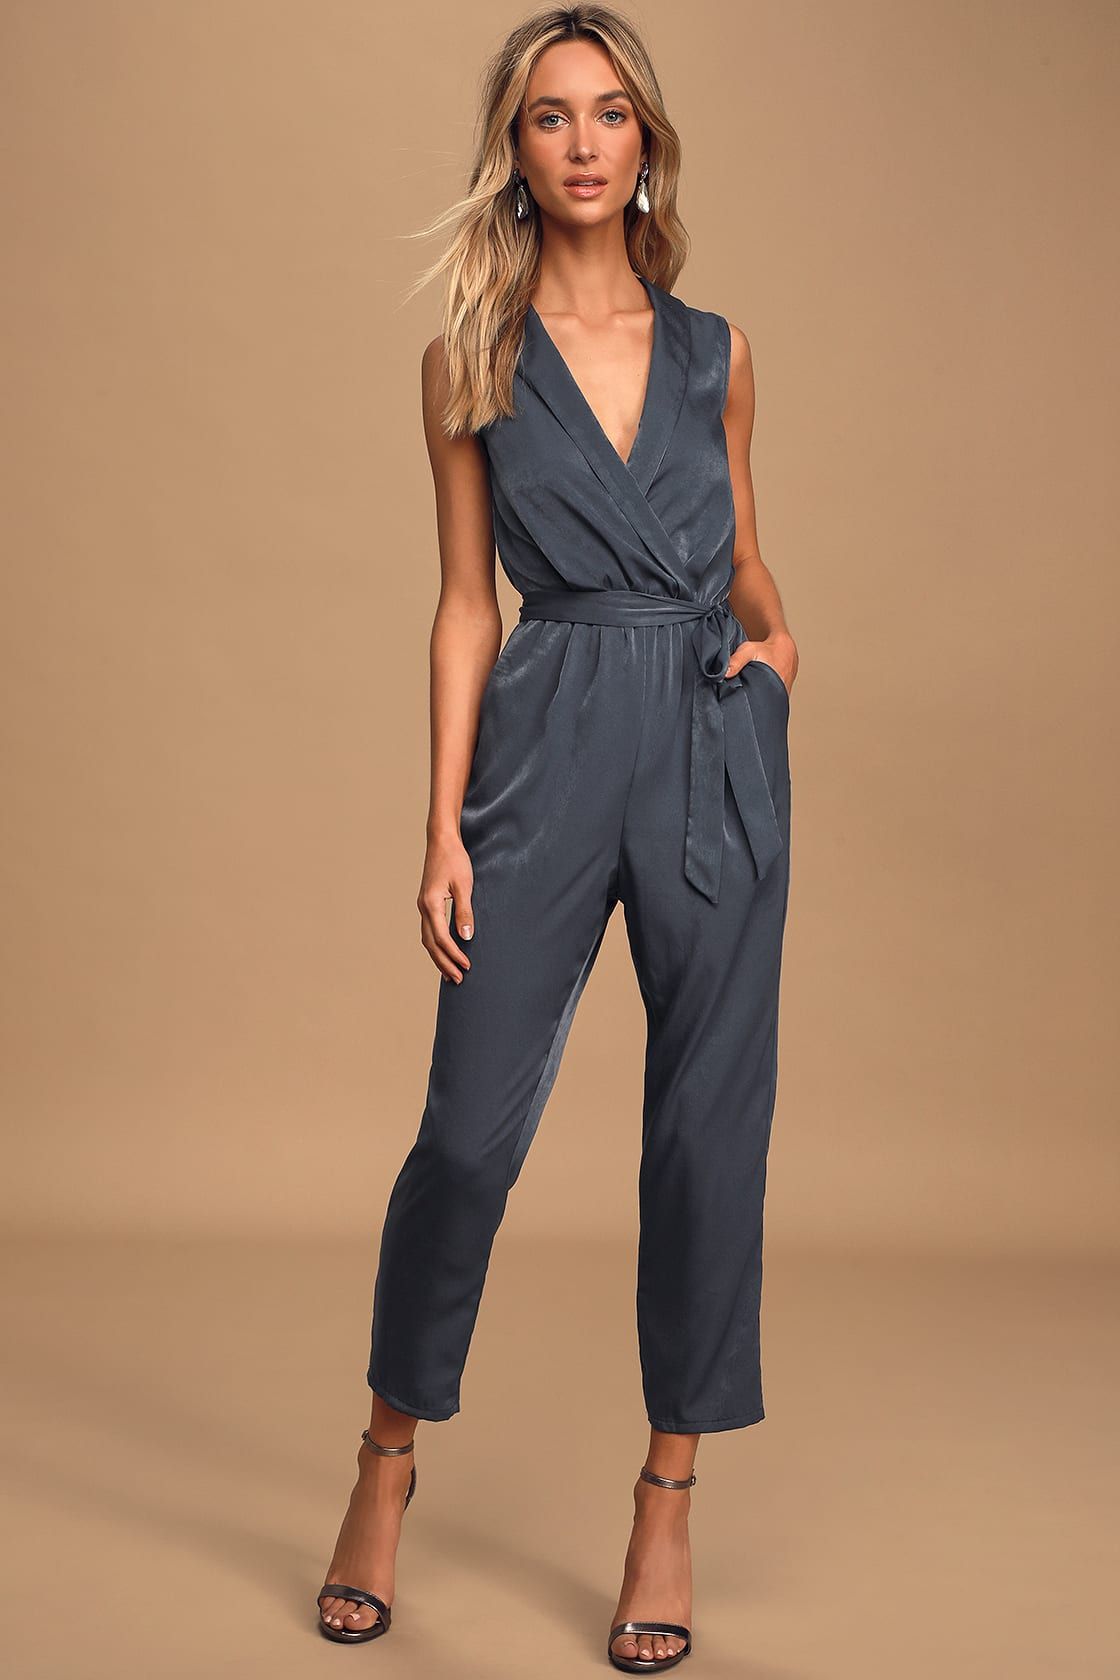 Women's All Ease Lounge Jumpsuit made with Organic Cotton | Pact